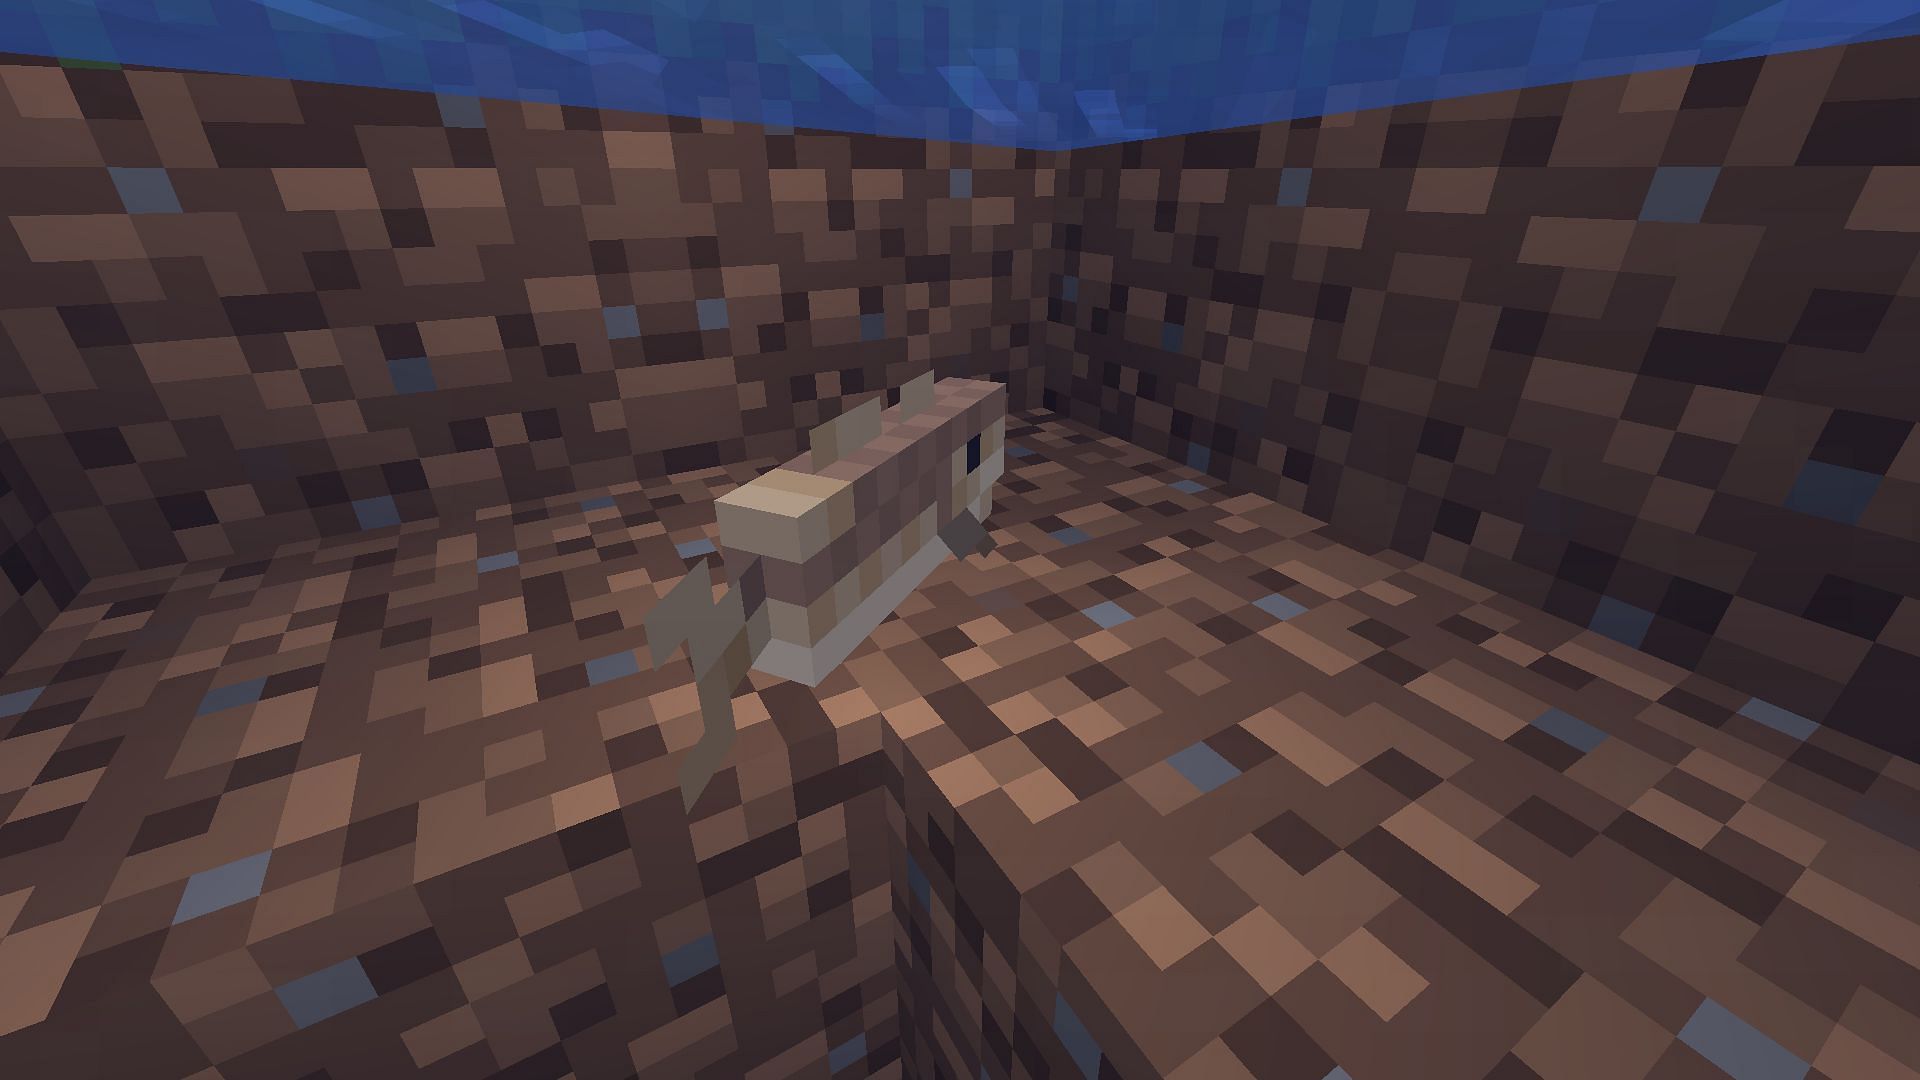 Cod, Salmon, Pufferfish, and Tropical Fish, all have the same amount of health (Image via Minecraft)